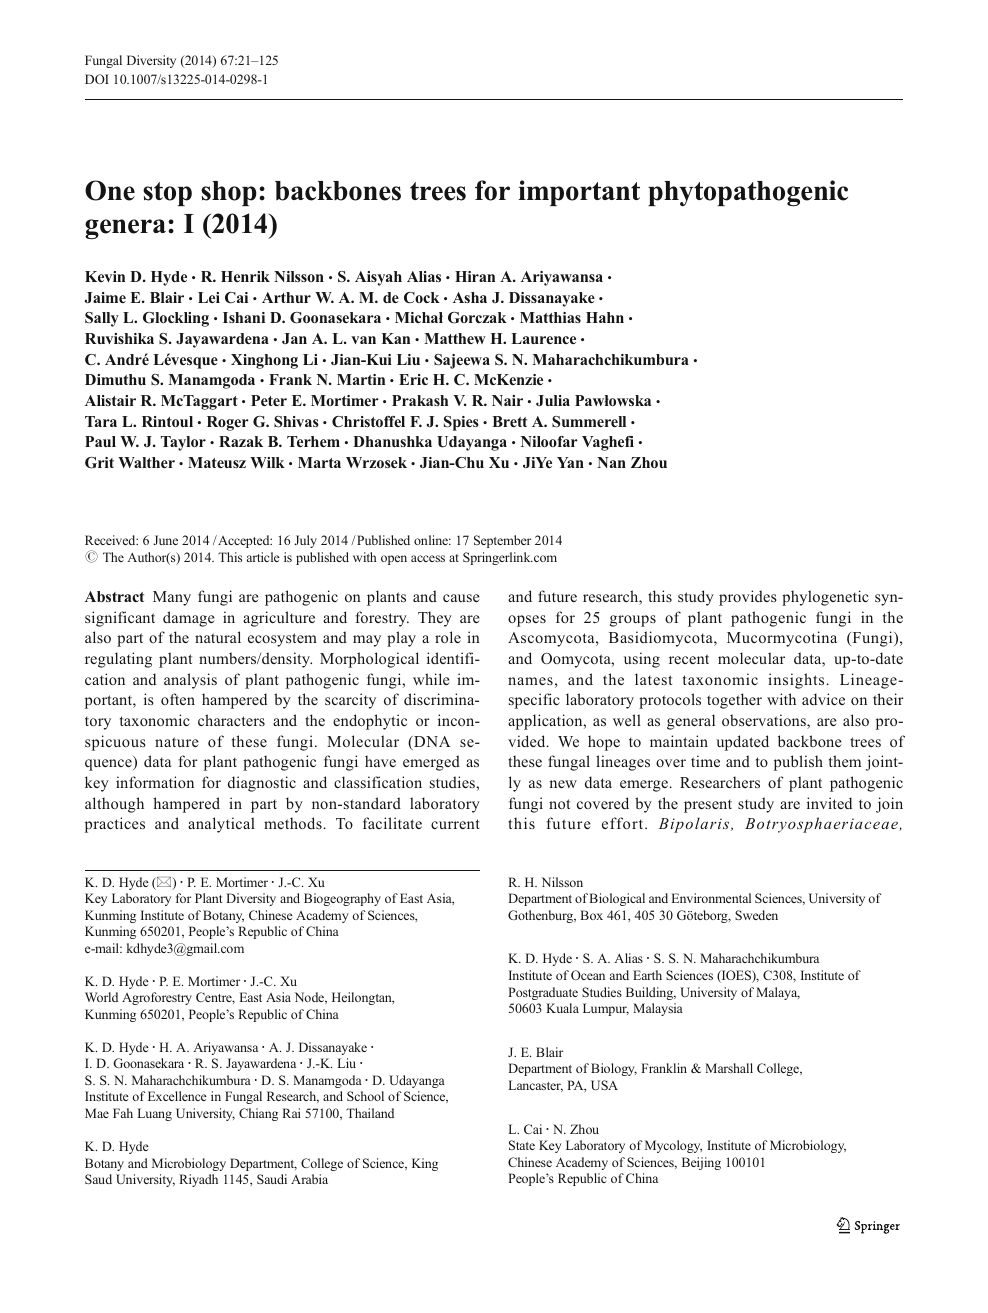 One Stop Shop Backbones Trees For Important Phytopathogenic Genera I 14 Topic Of Research Paper In Biological Sciences Download Scholarly Article Pdf And Read For Free On Cyberleninka Open Science Hub